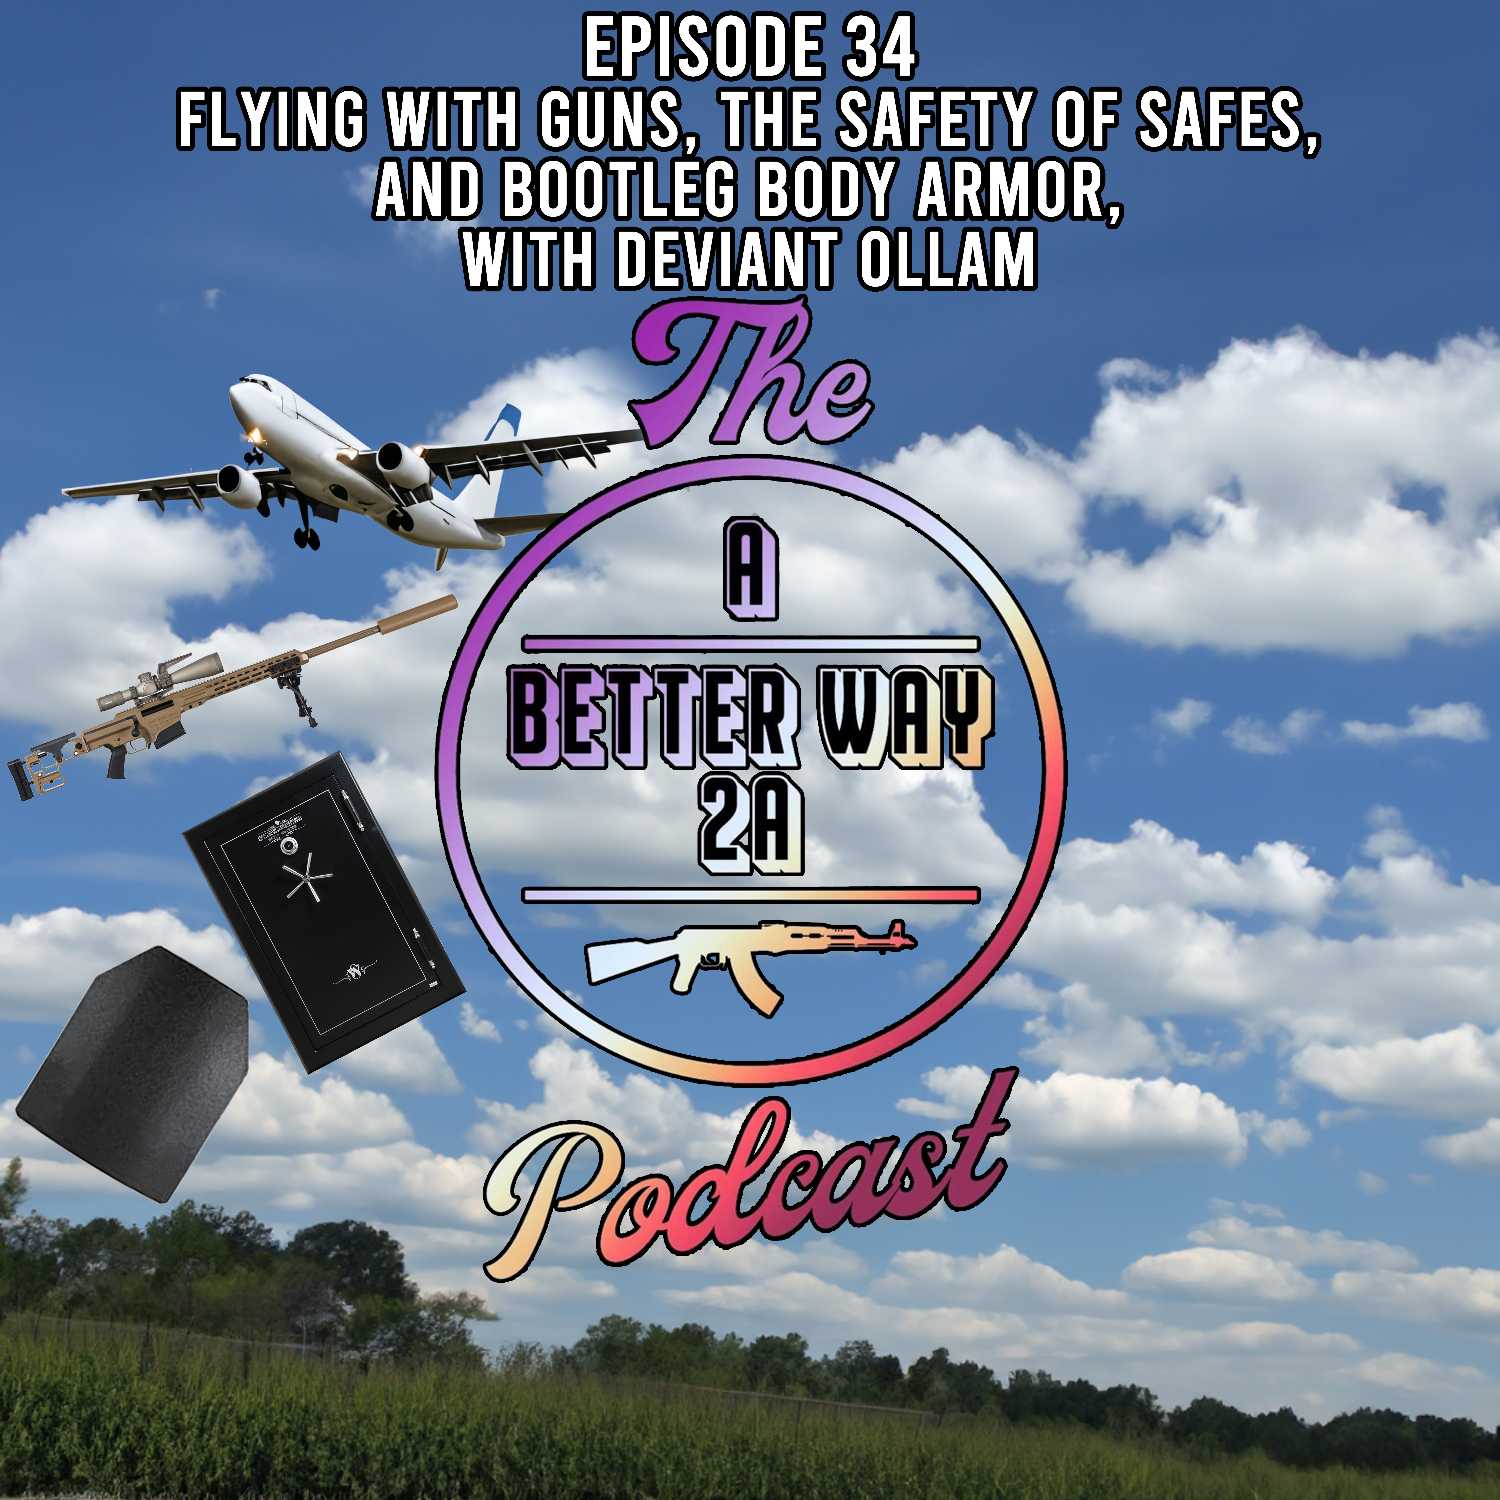 Episode 34 - Flying With Guns, The Safety Of Safes, and Bootleg Body Armor, with Deviant Ollam